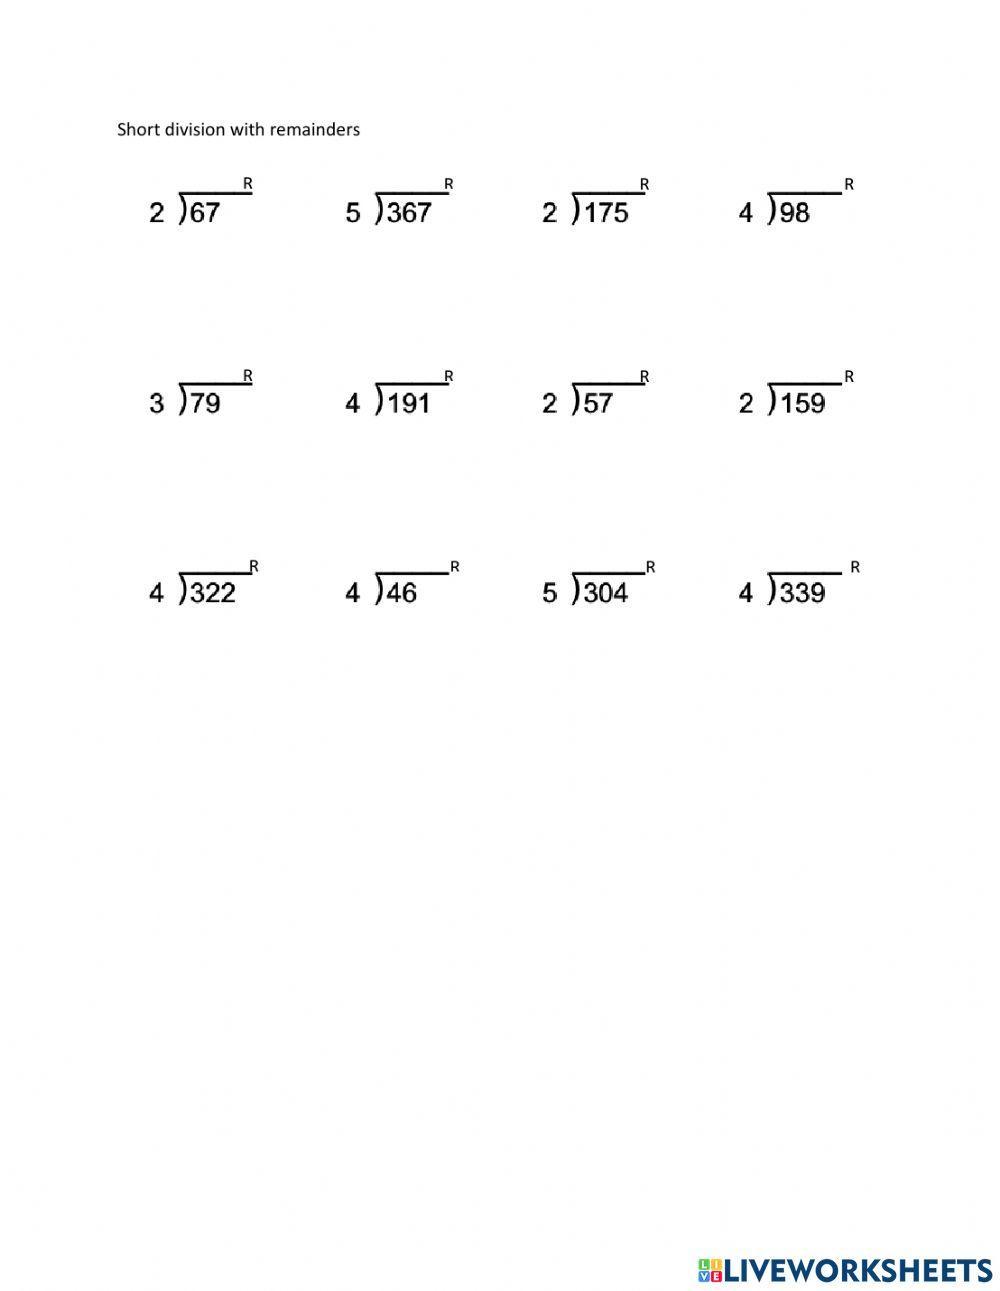 Short division with remainders